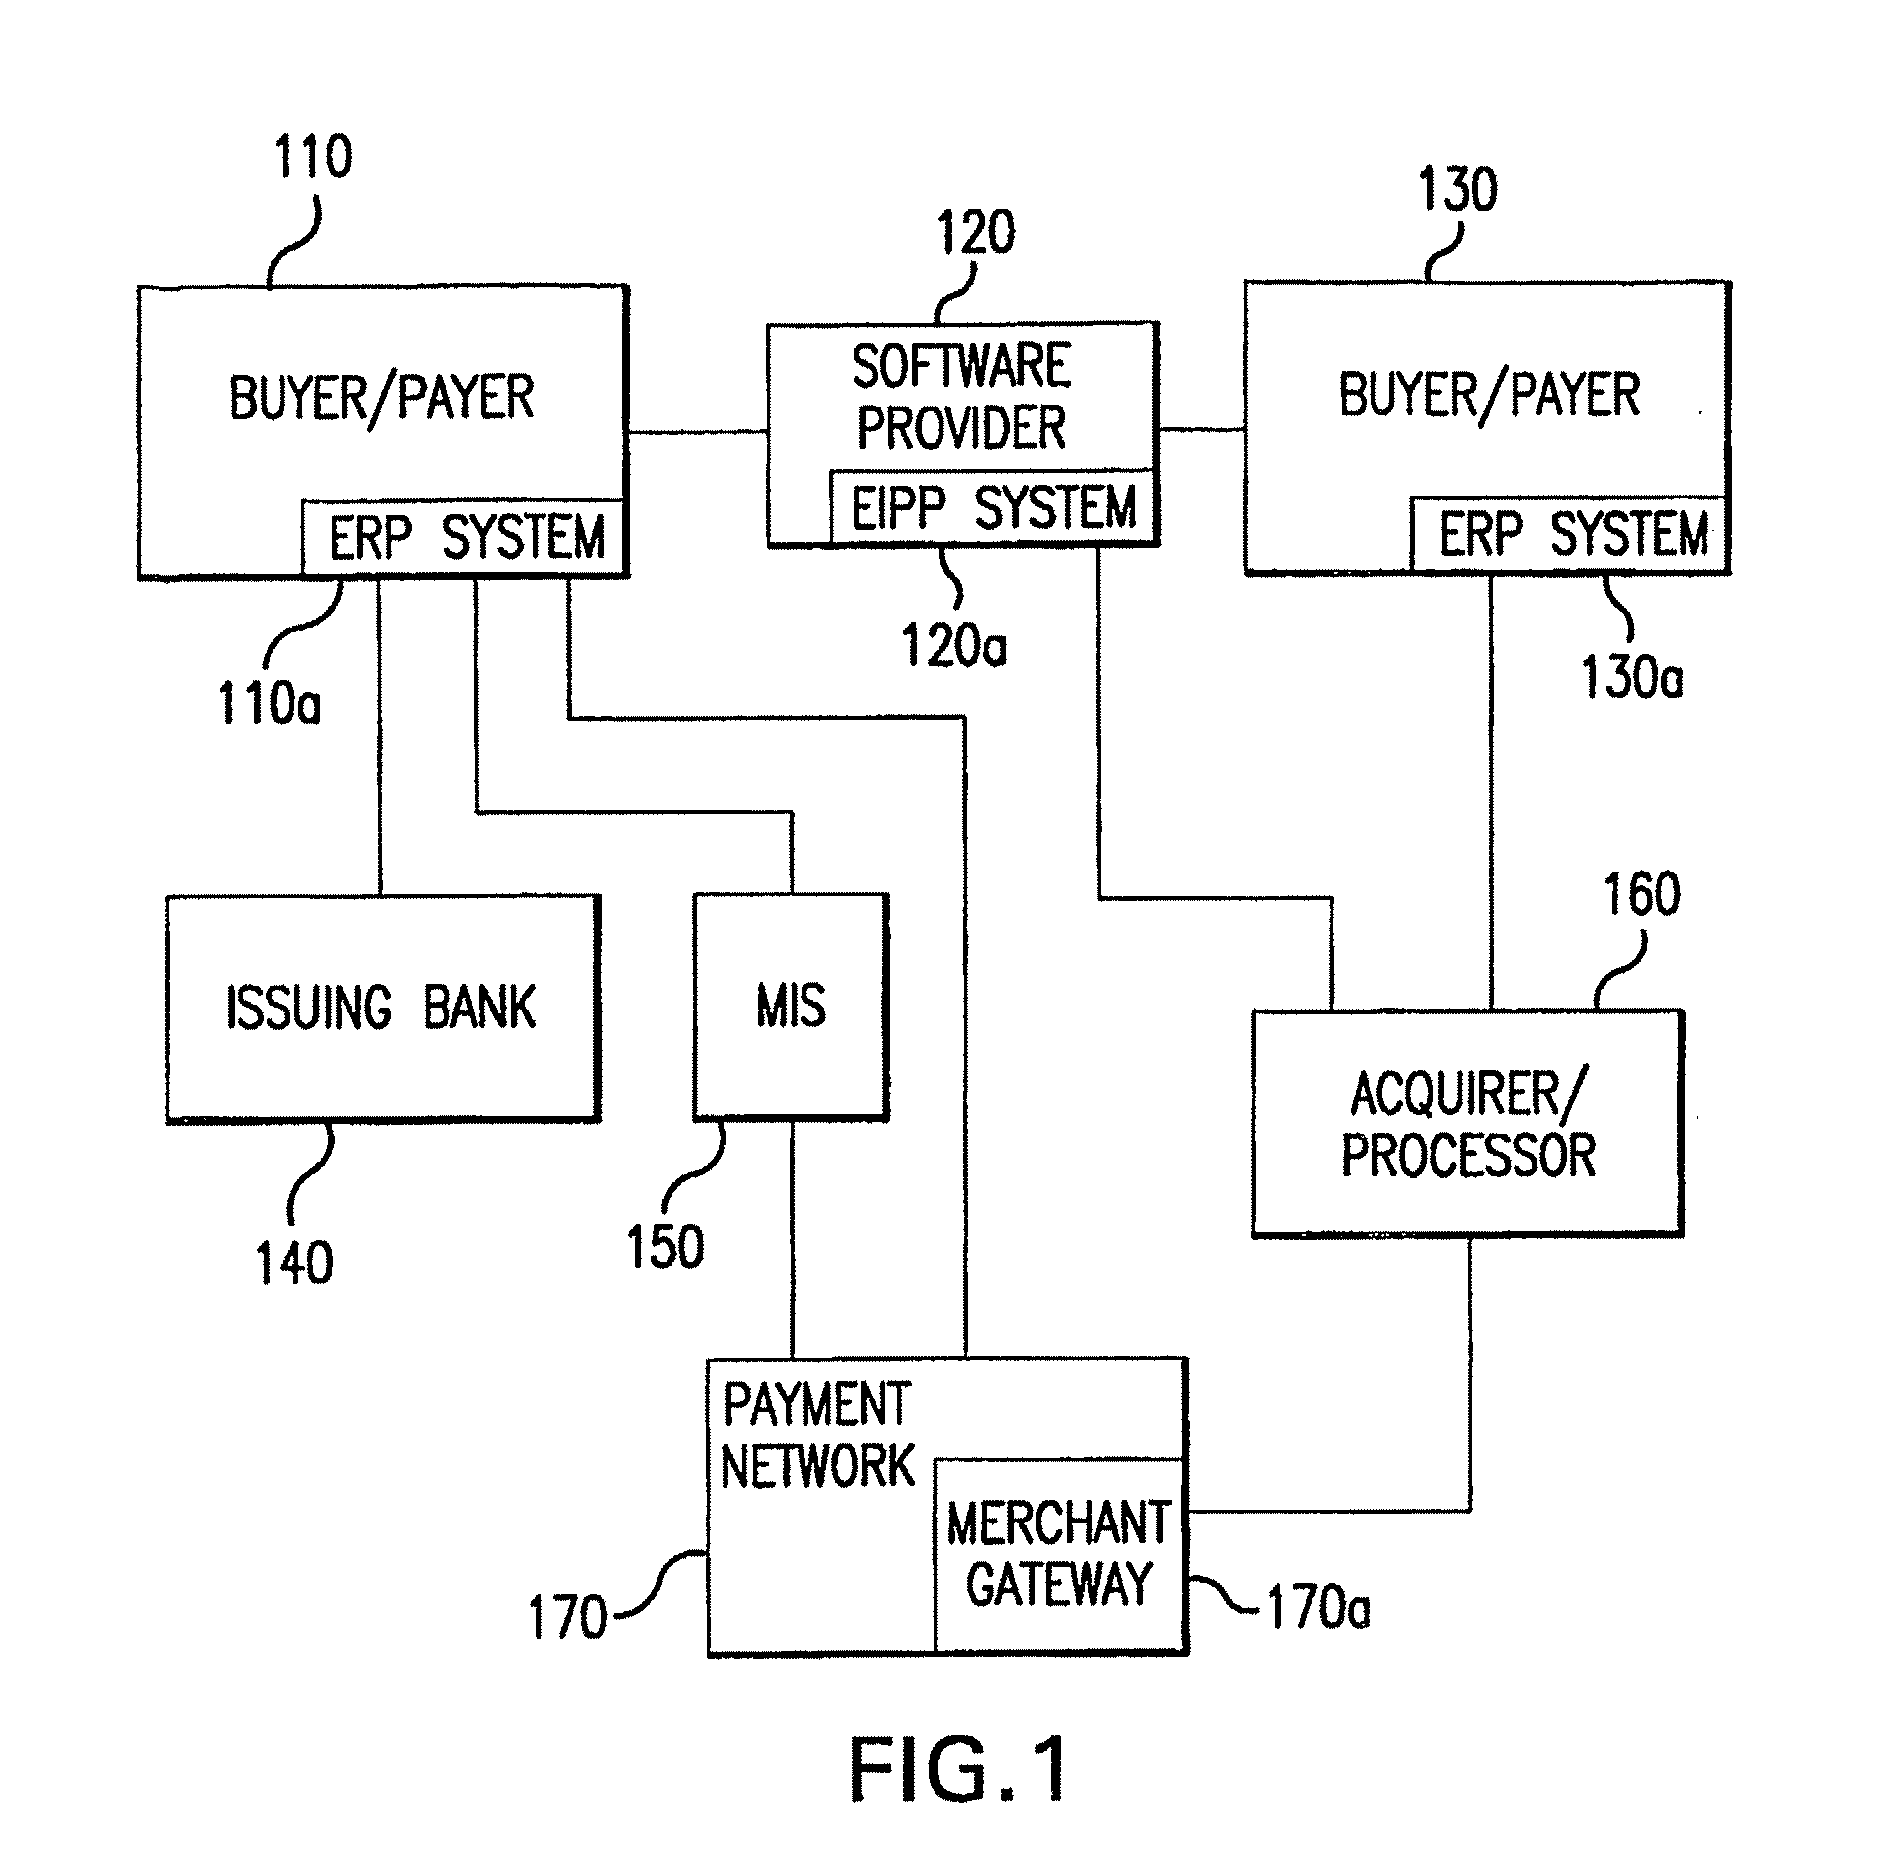 Method And System For Automated Payment Authorization And Settlement